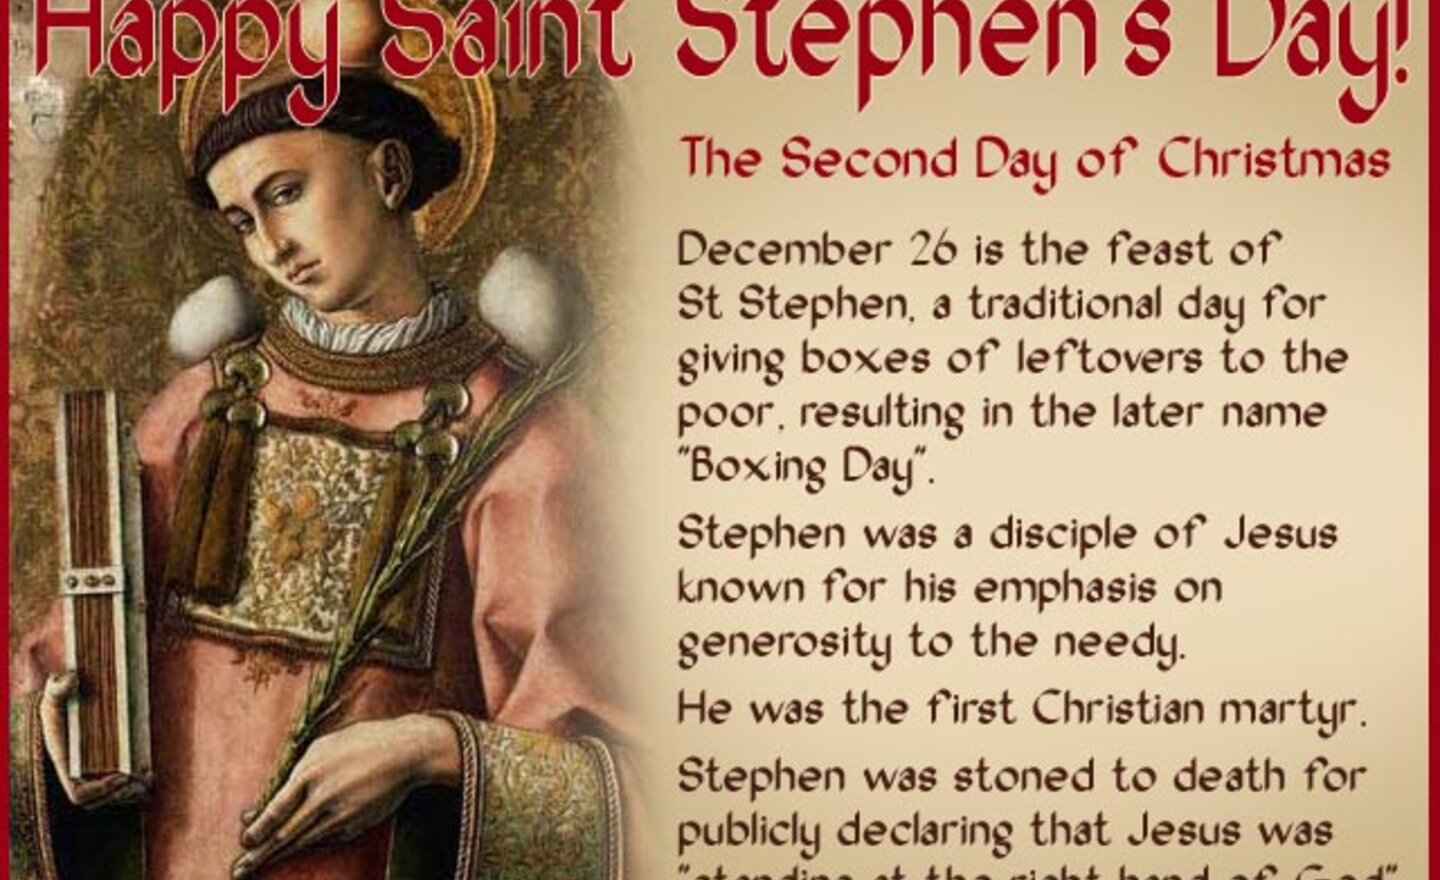 Image of Happy St. Stephen's Day